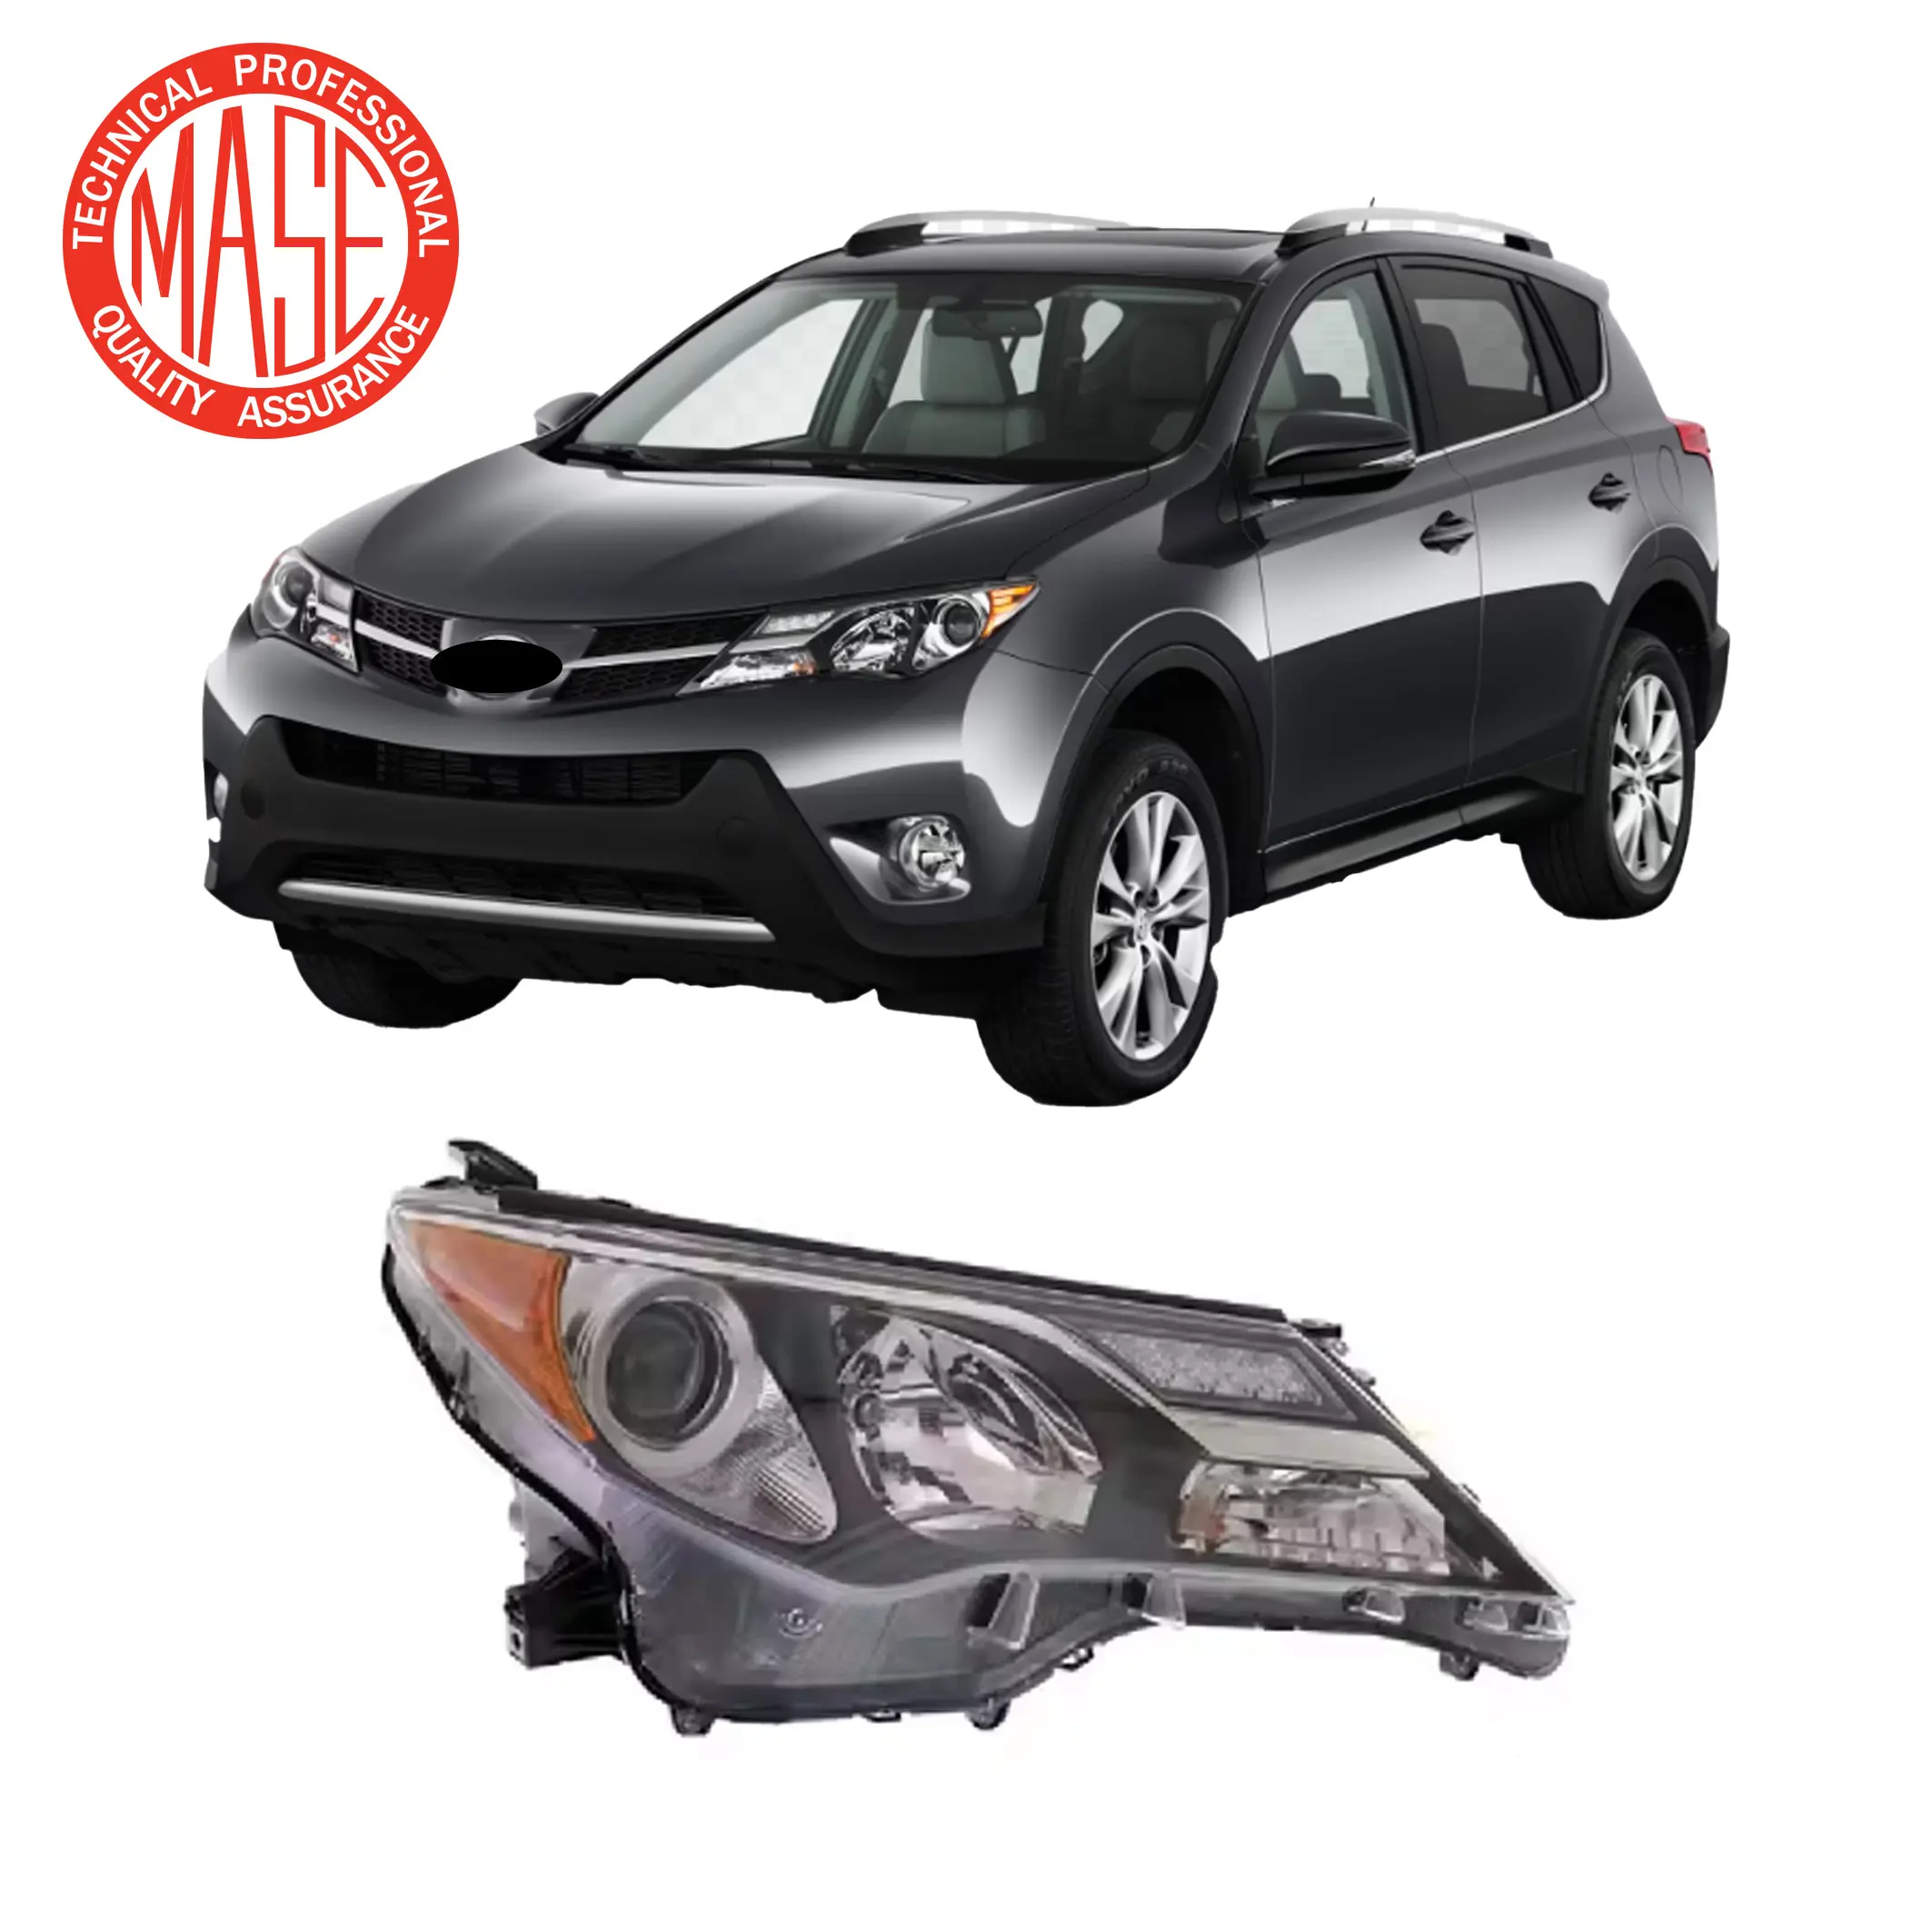 CZJF Factory Price Wholesale Hid Xenon Head Lamp For Rav4 2013 2014 2015 USA OEM 81170-OR070 81130-OR070